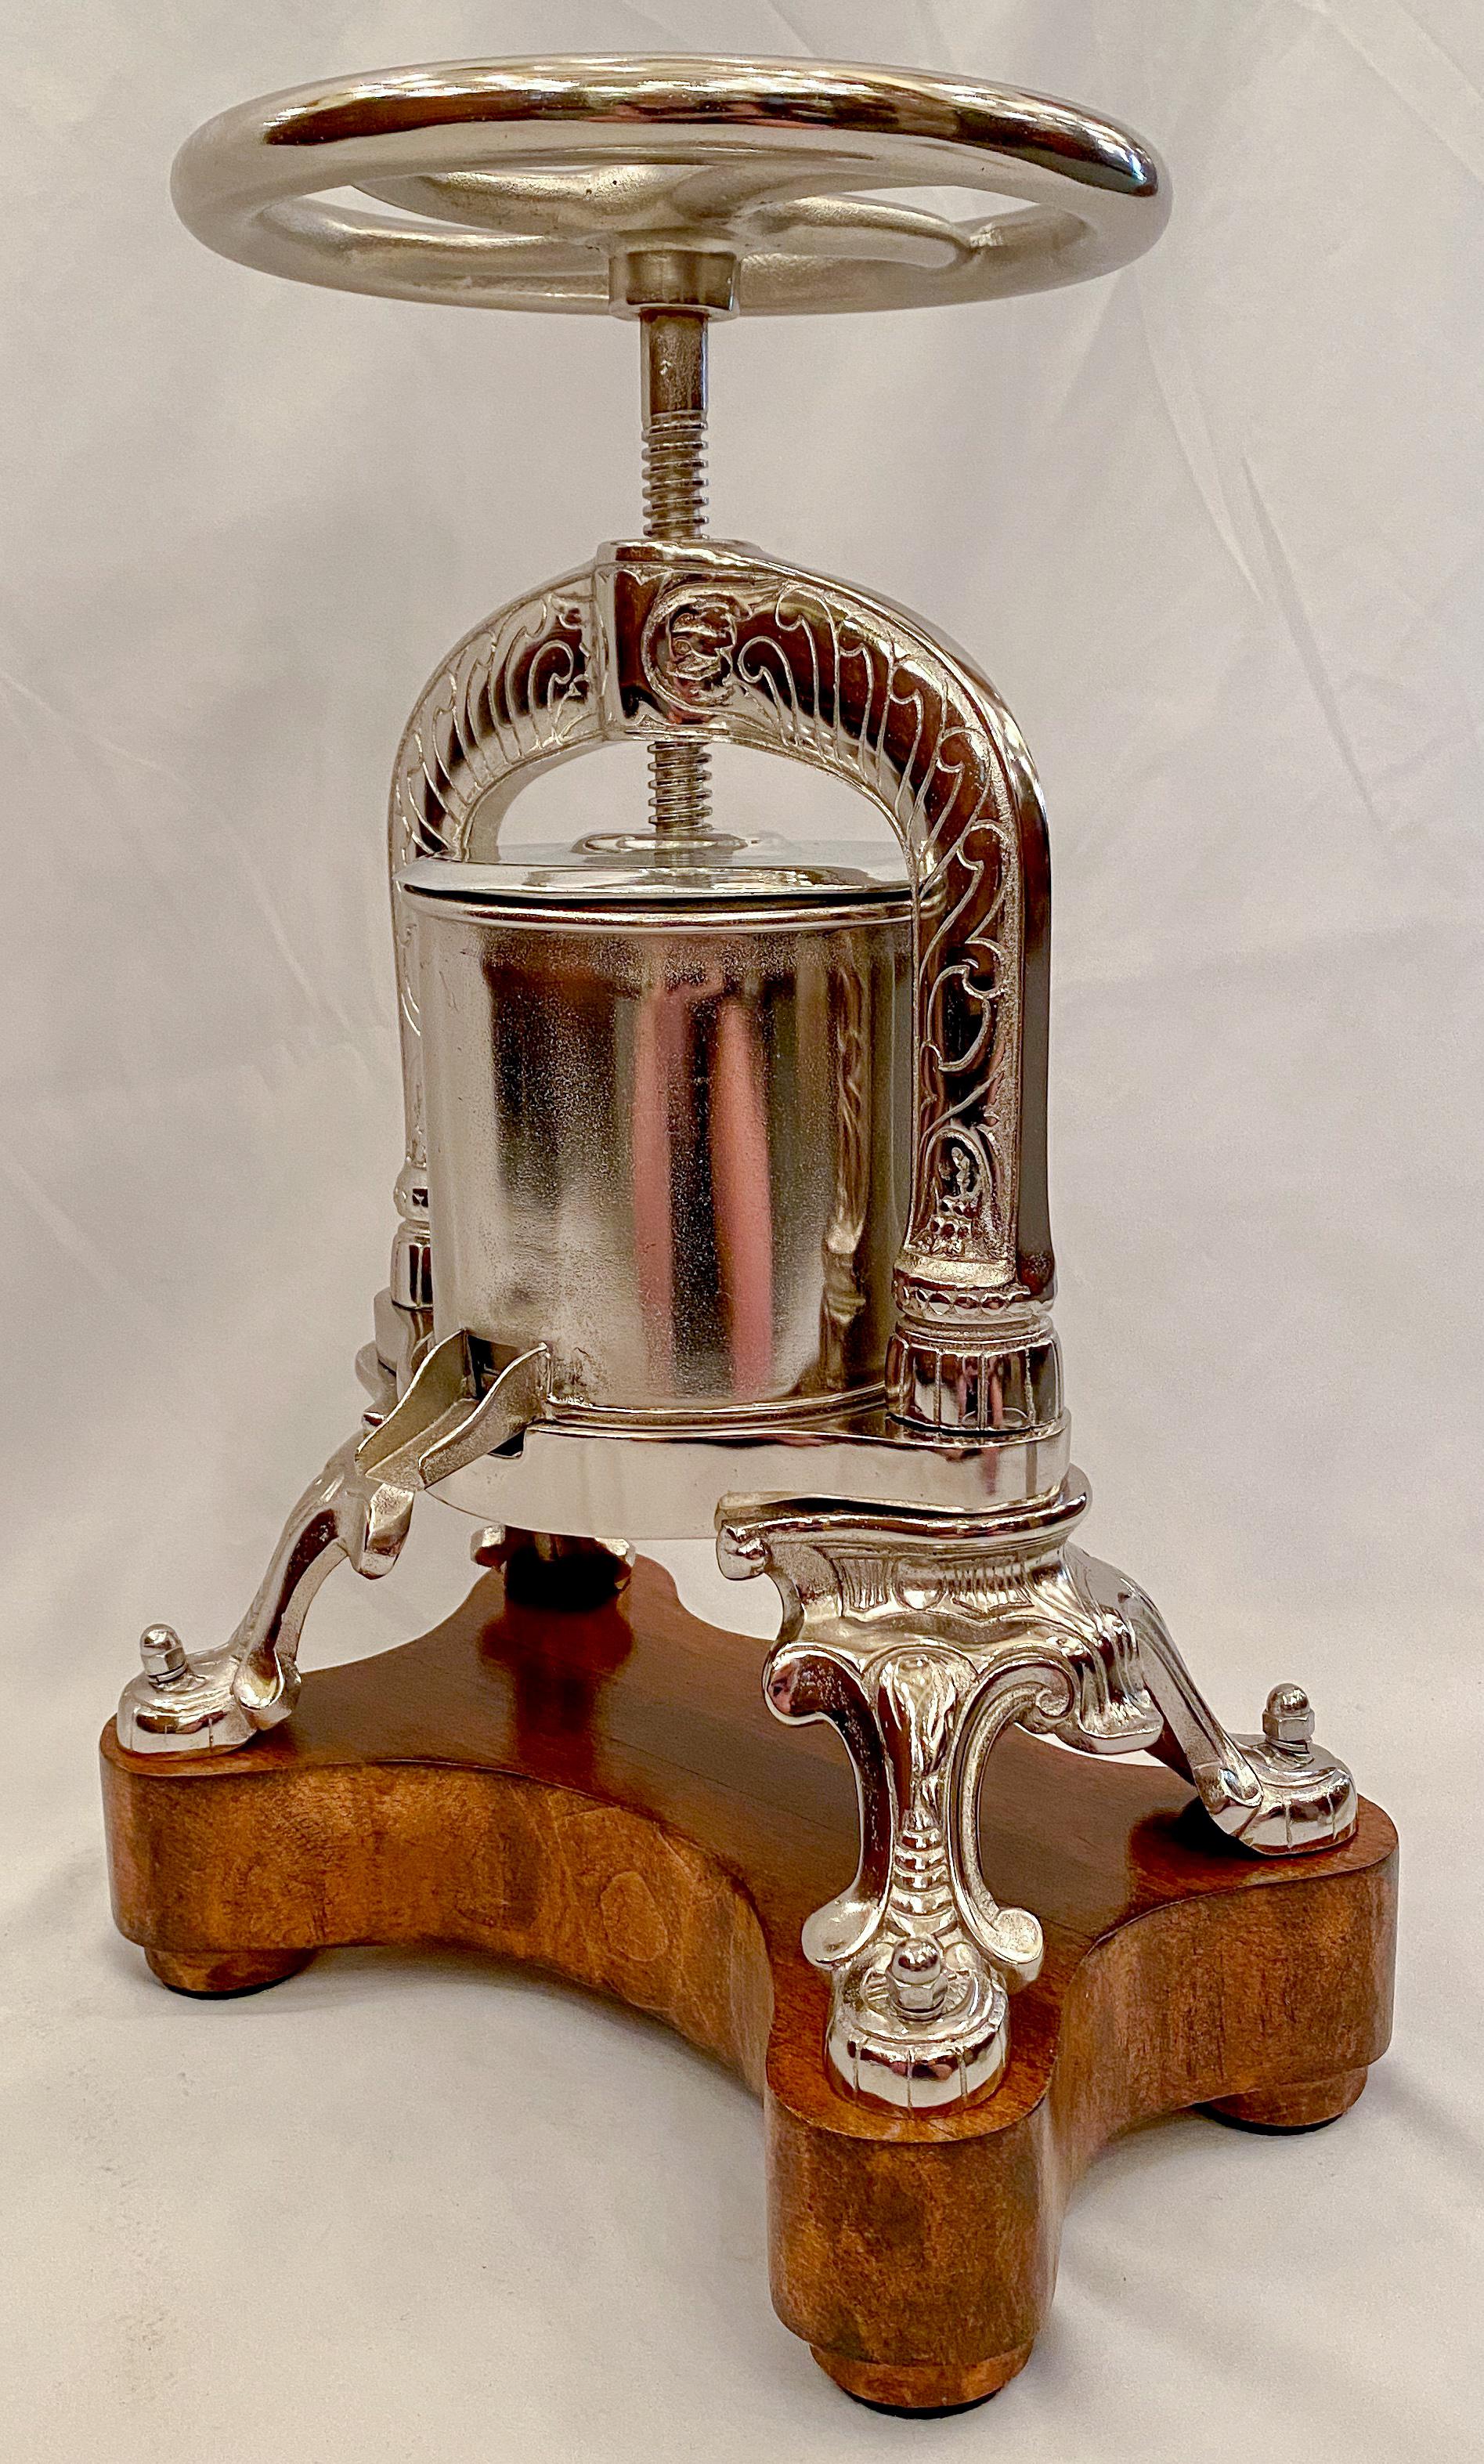 Edwardian Antique French Silvered Bronze and Iron Duck Press, circa 1900-1910